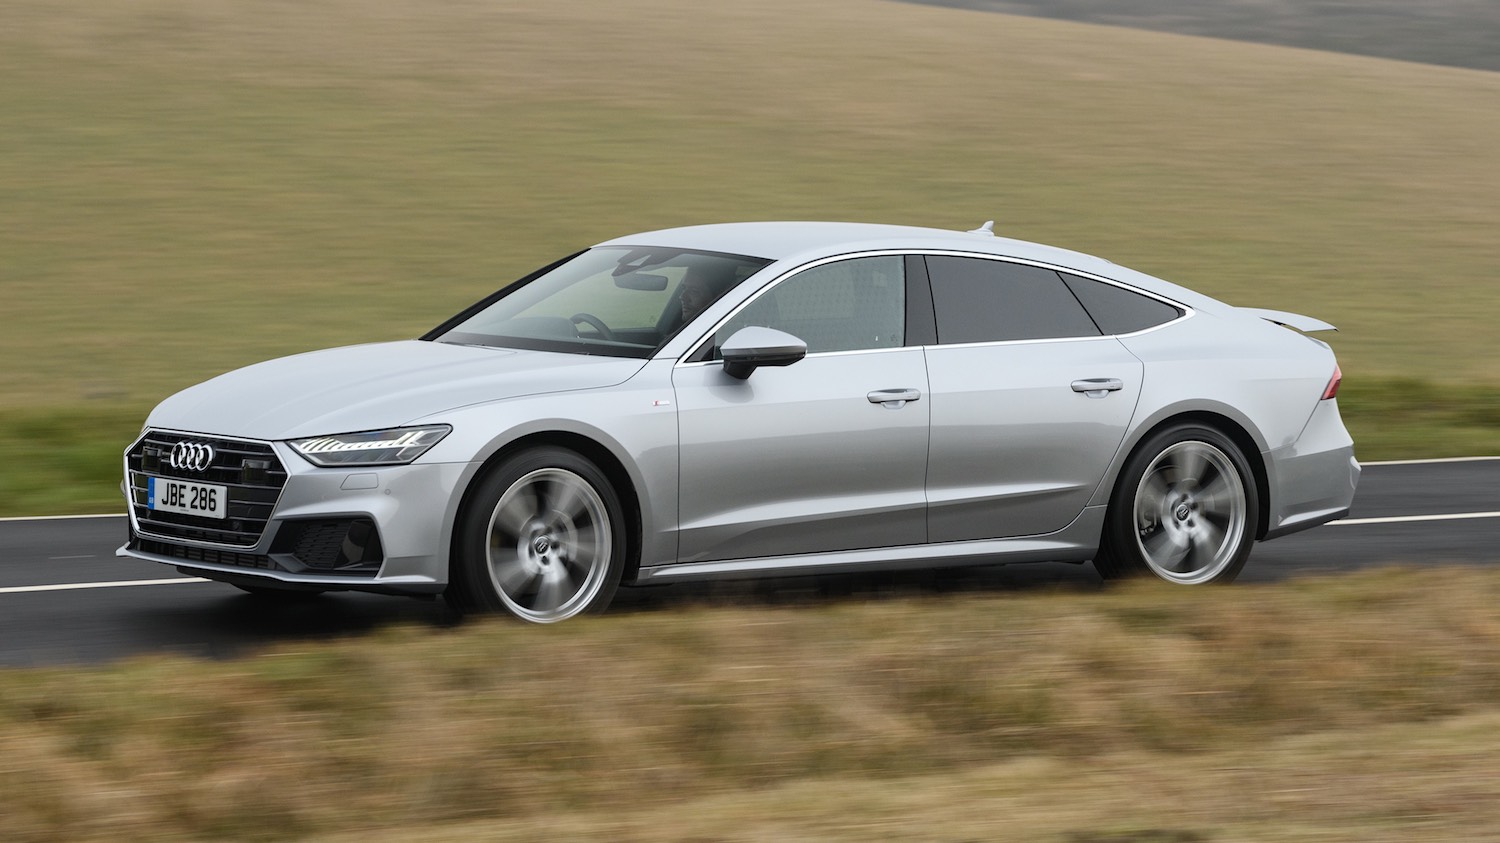 Neil Lyndon motoring correspondent reviews the latest Audi A7 for Drive 21